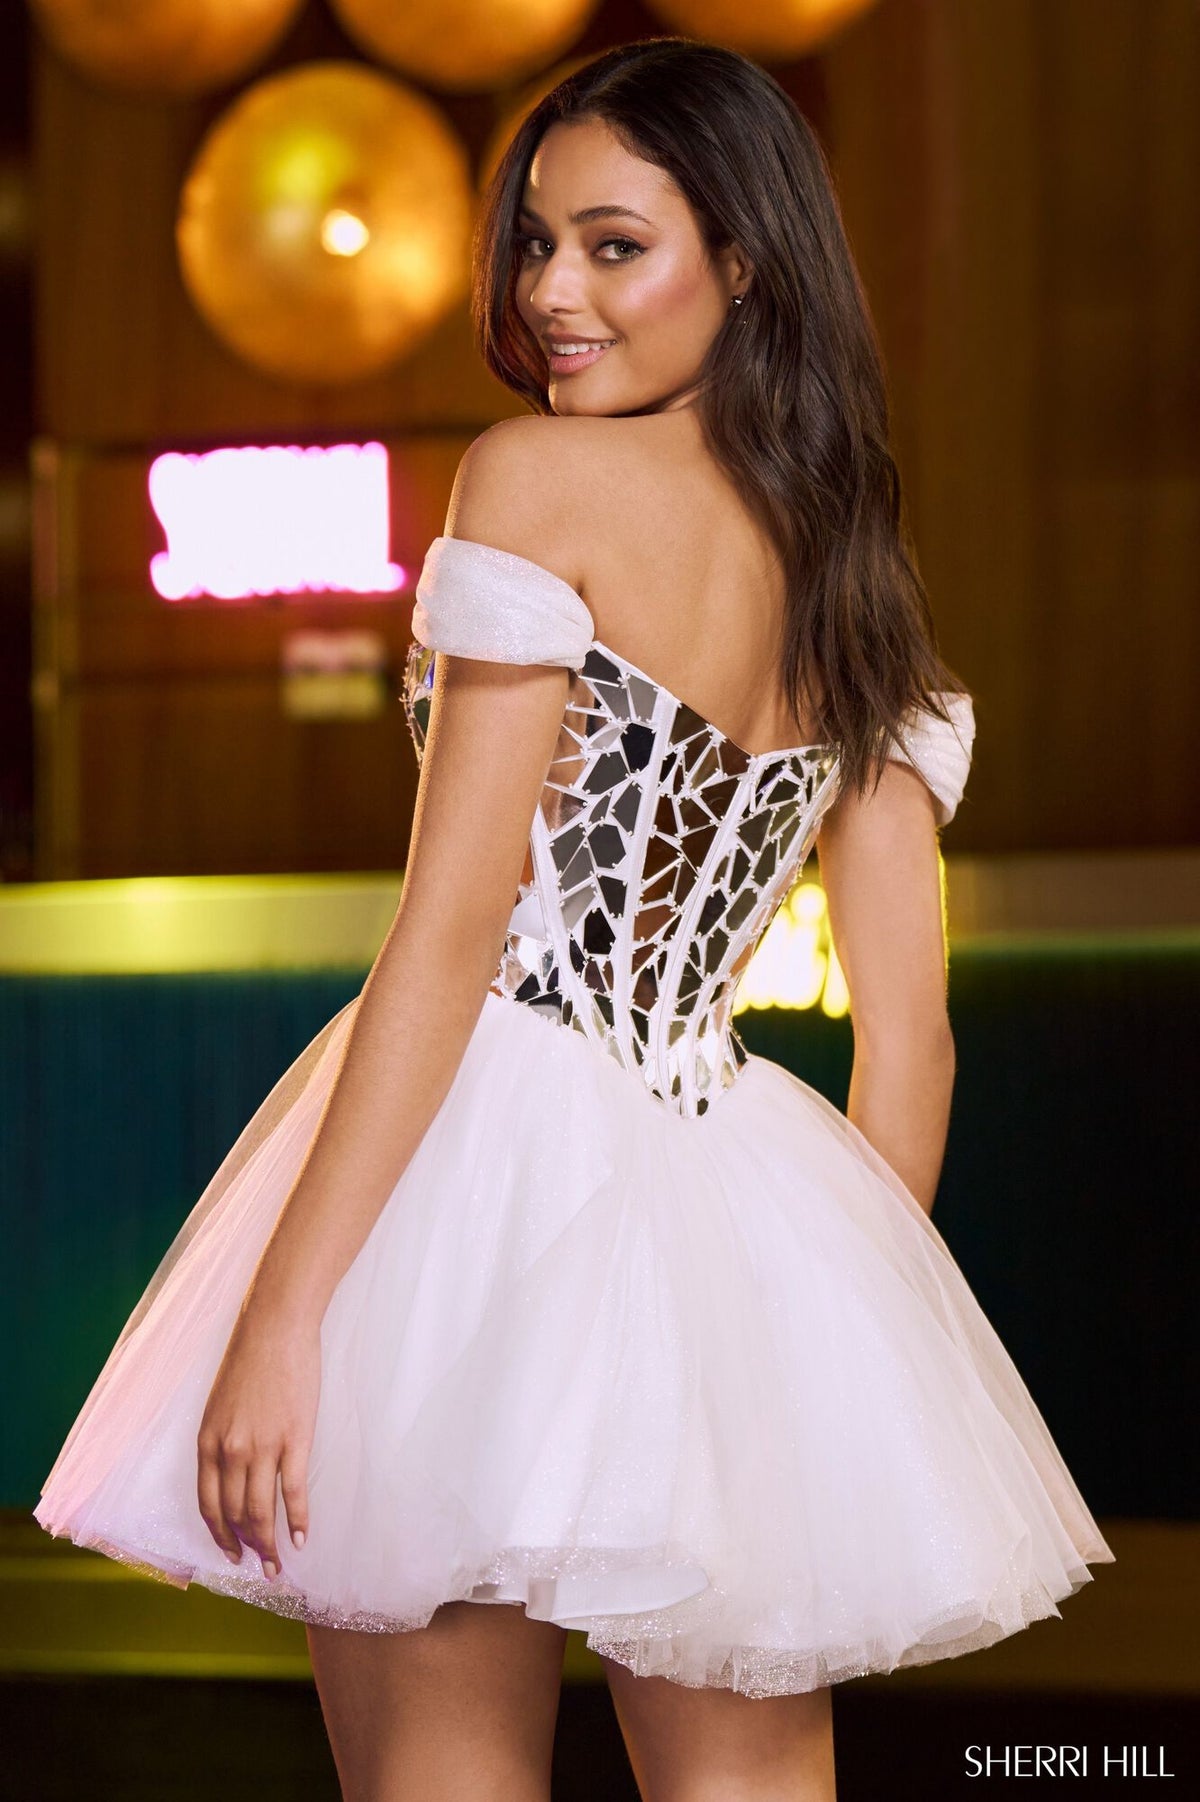 Embrace glamour with Sherri Hill's 55715 dress featuring a cut glass embellished bodice, glittery tulle skirt, and off-the-shoulder sleeves. Perfect for homecoming and graduation. Available at Madeline's Boutique in Toronto and Boca Raton, Florida.